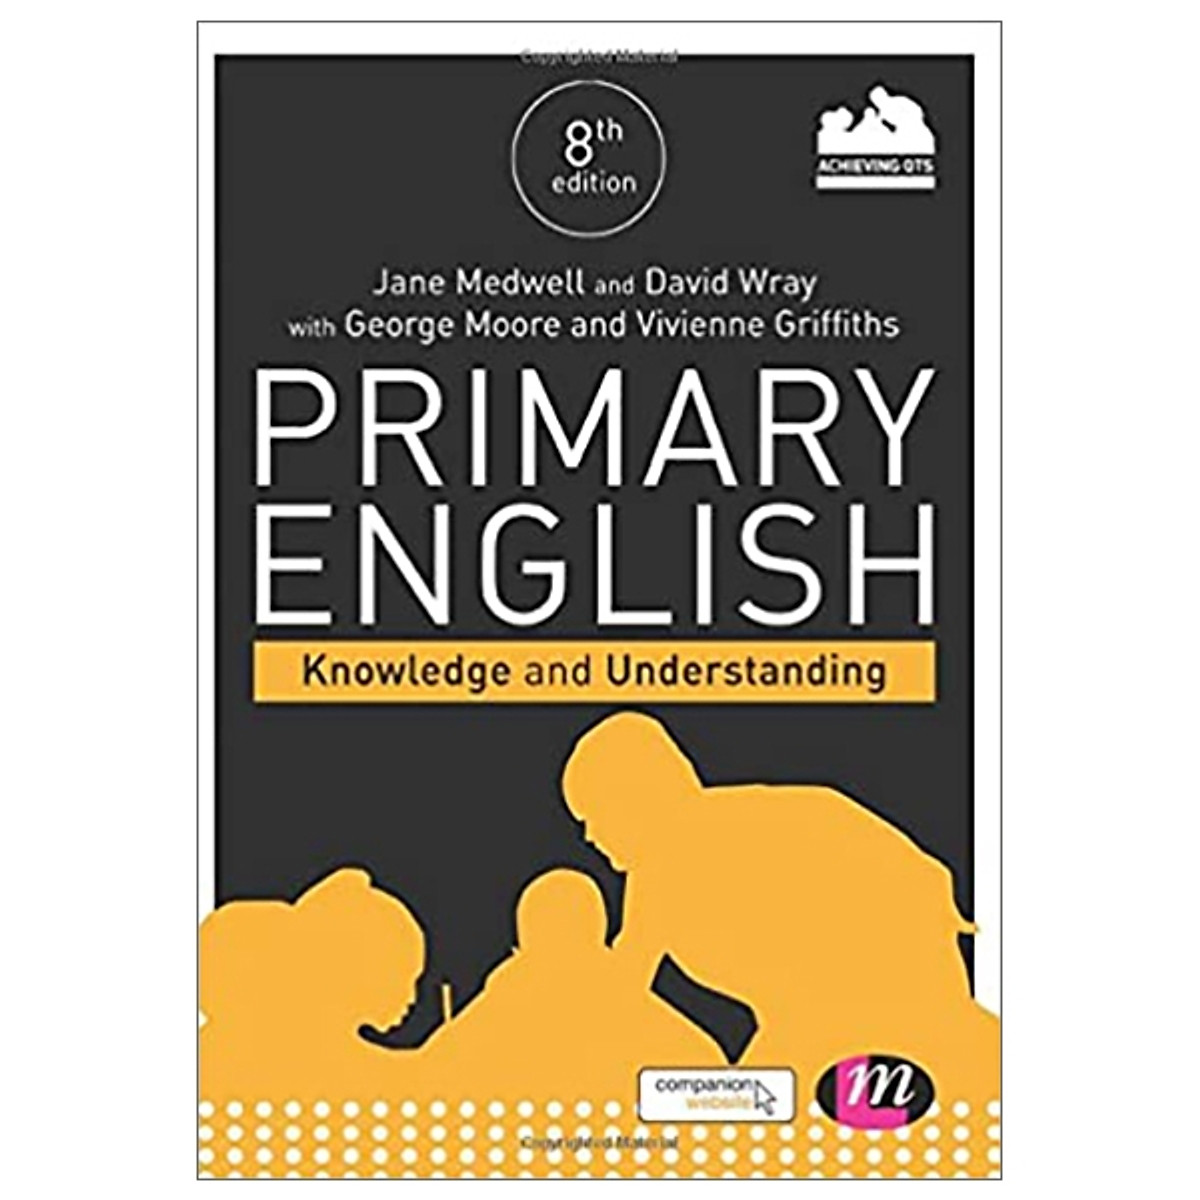 Primary English: Knowledge And Understanding (Achieving QTS Series)